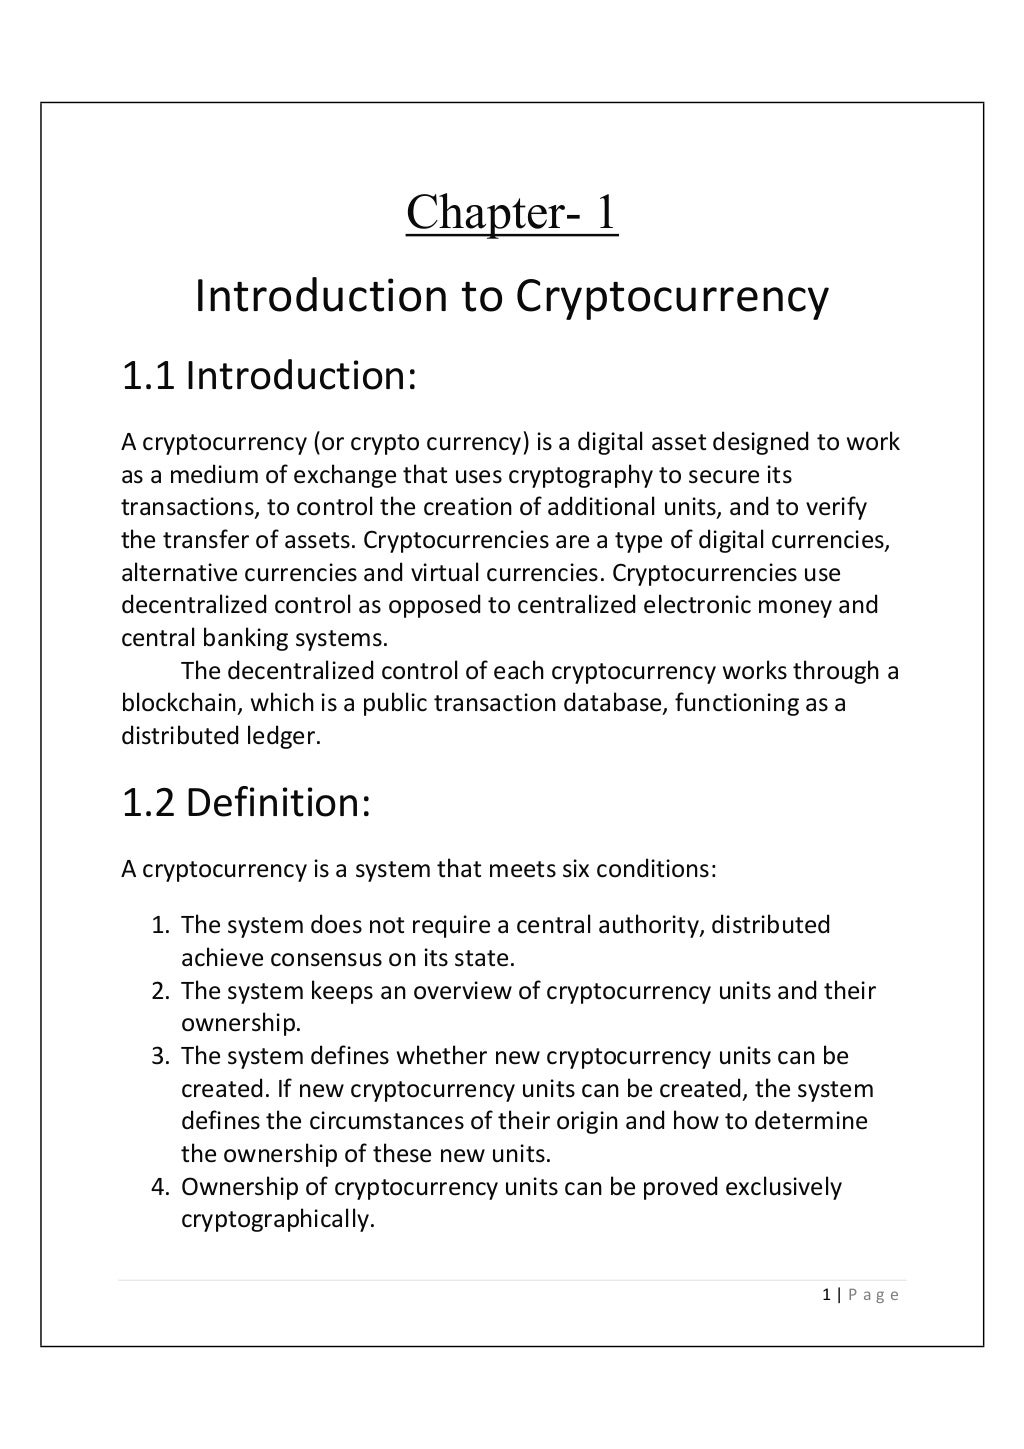 dissertation on cryptocurrency